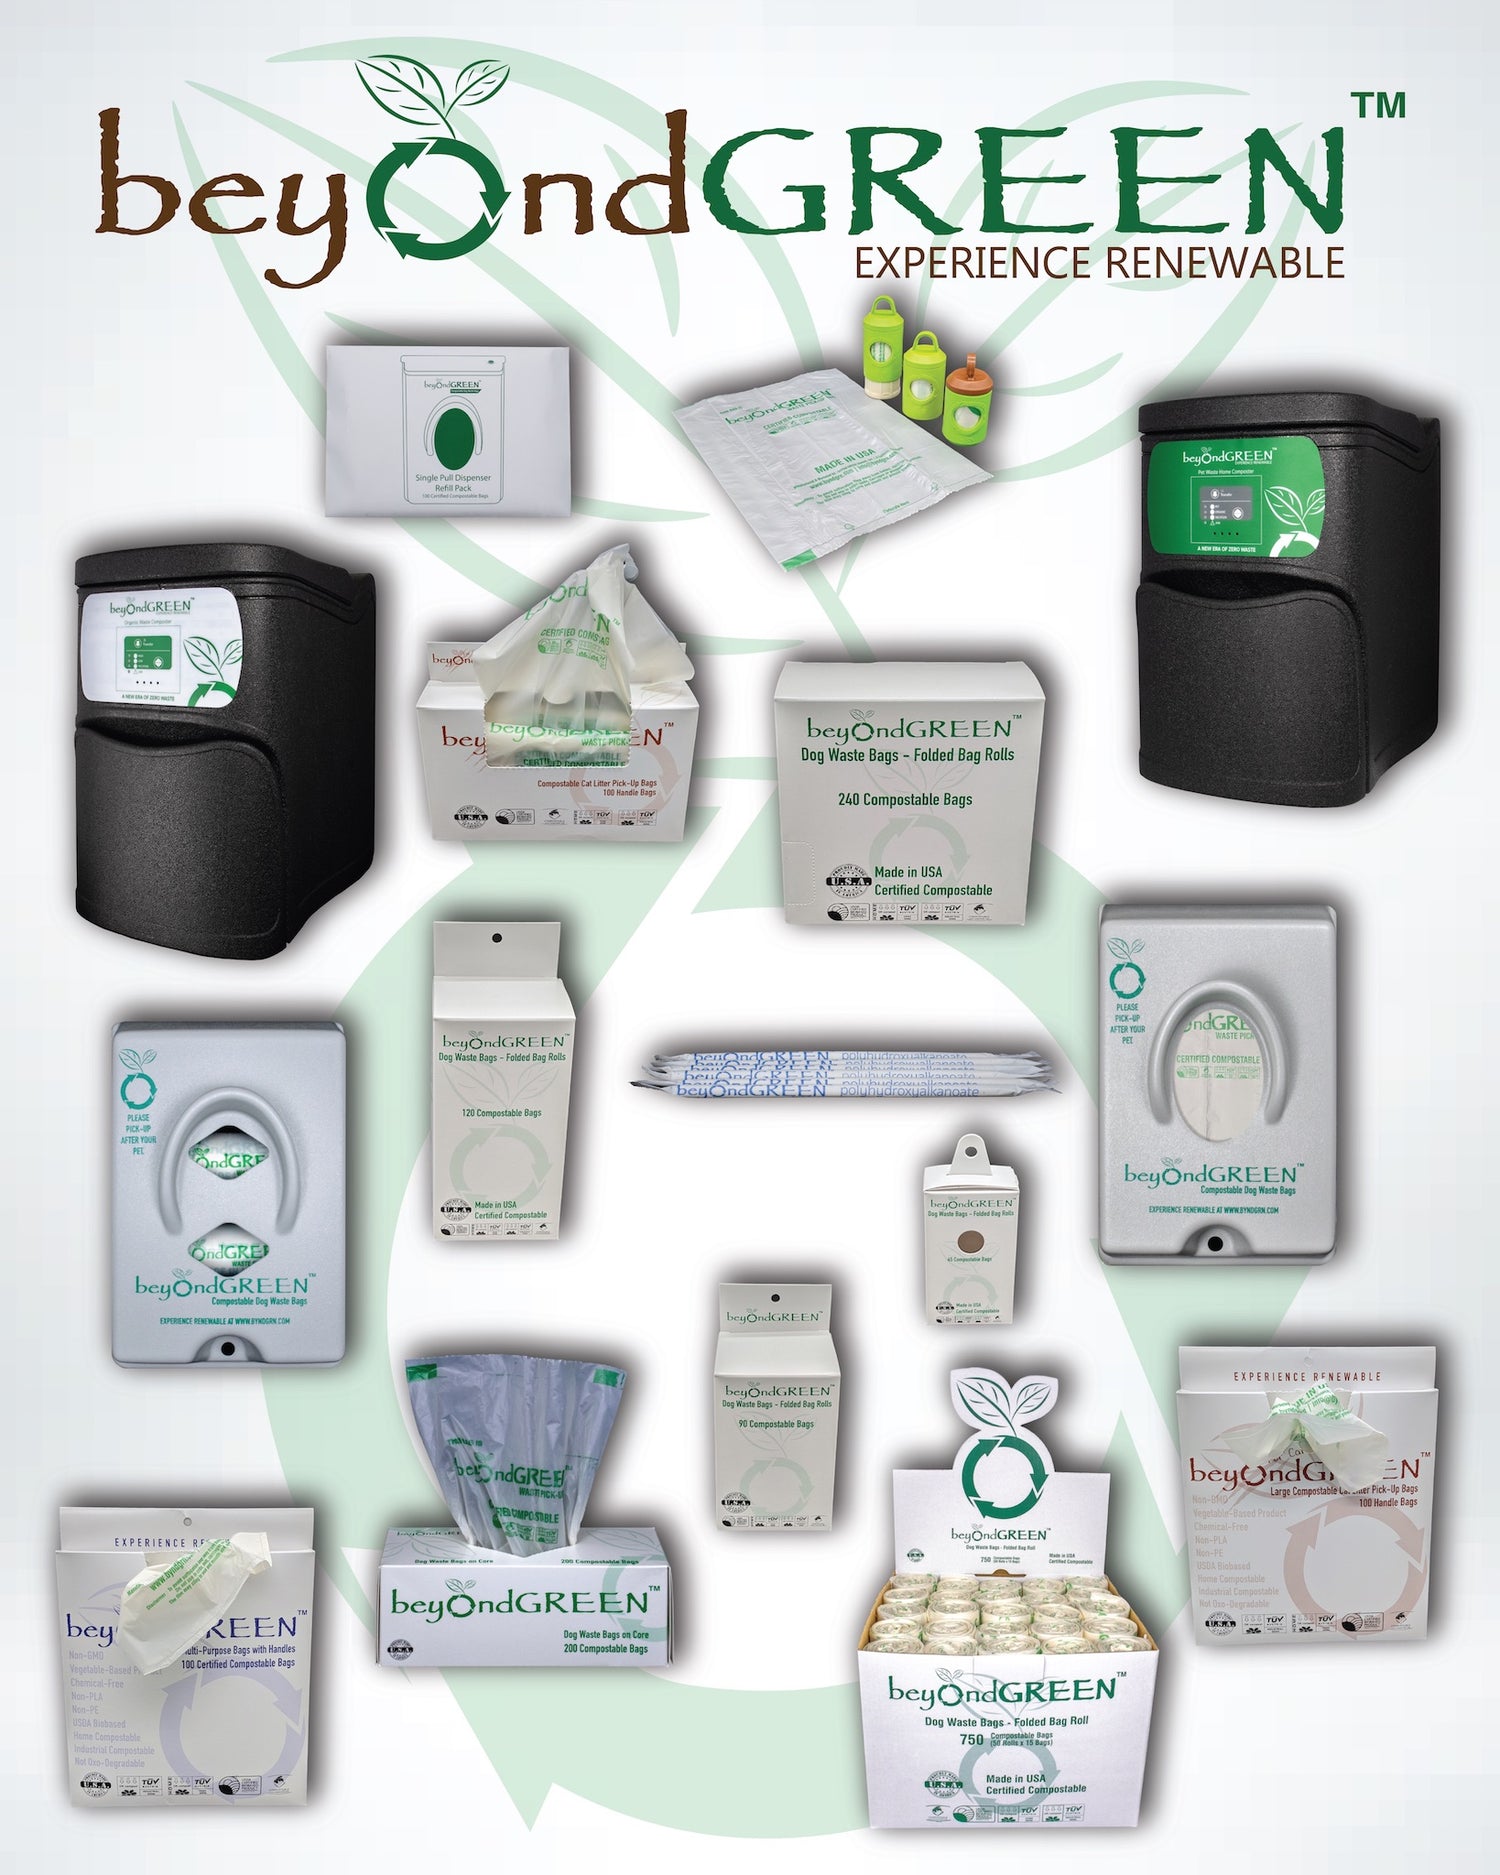 Why choose beyondGREEN's sustainable plant-based products?